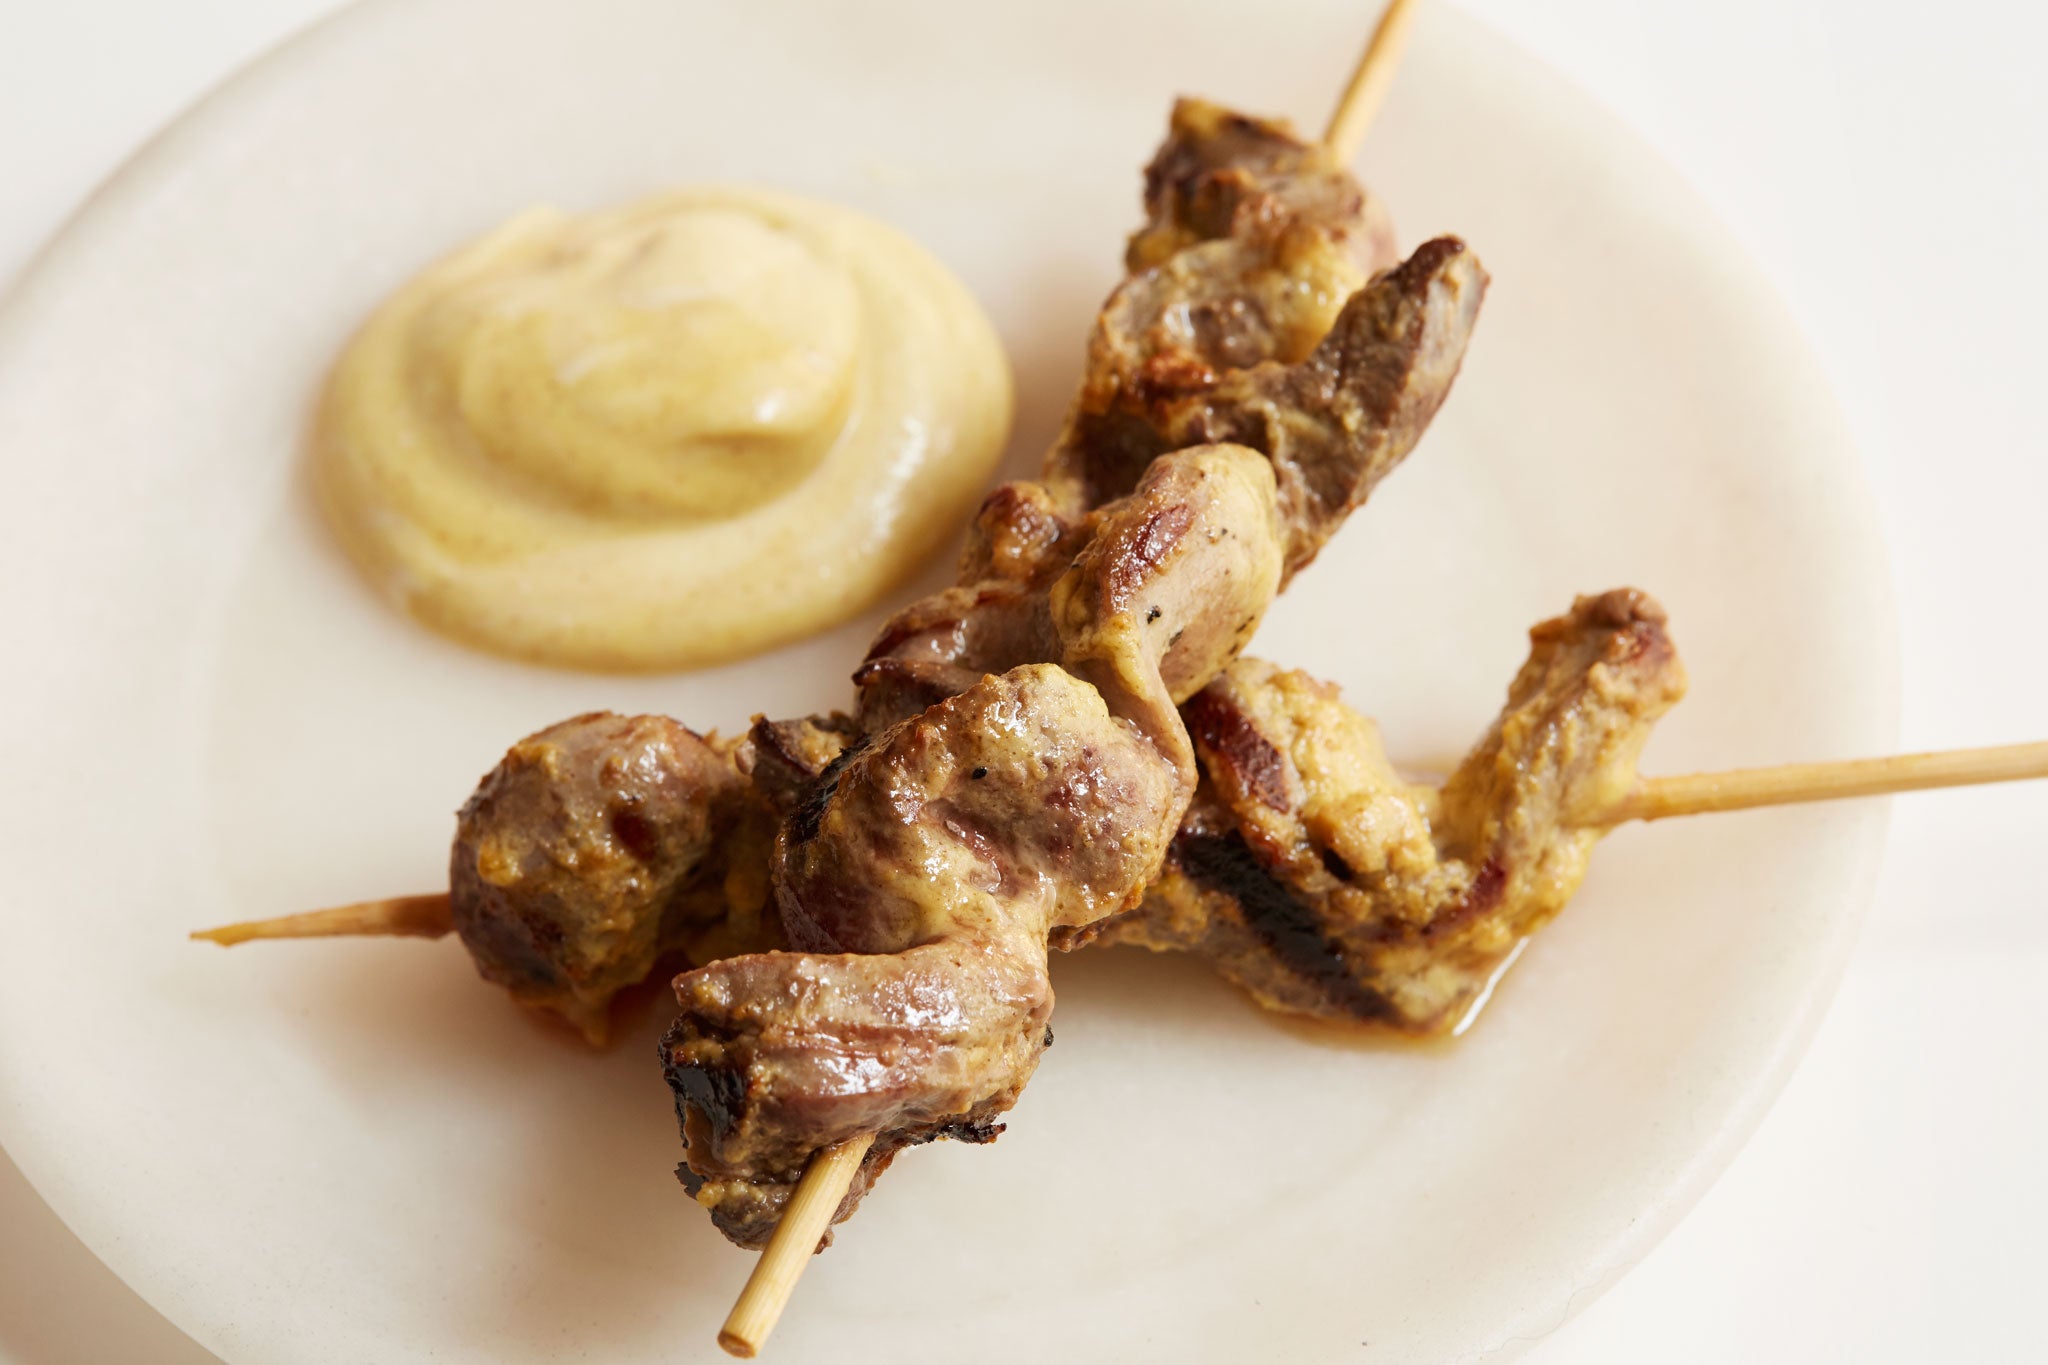 Lunch on a stick: Pig's offal skewers